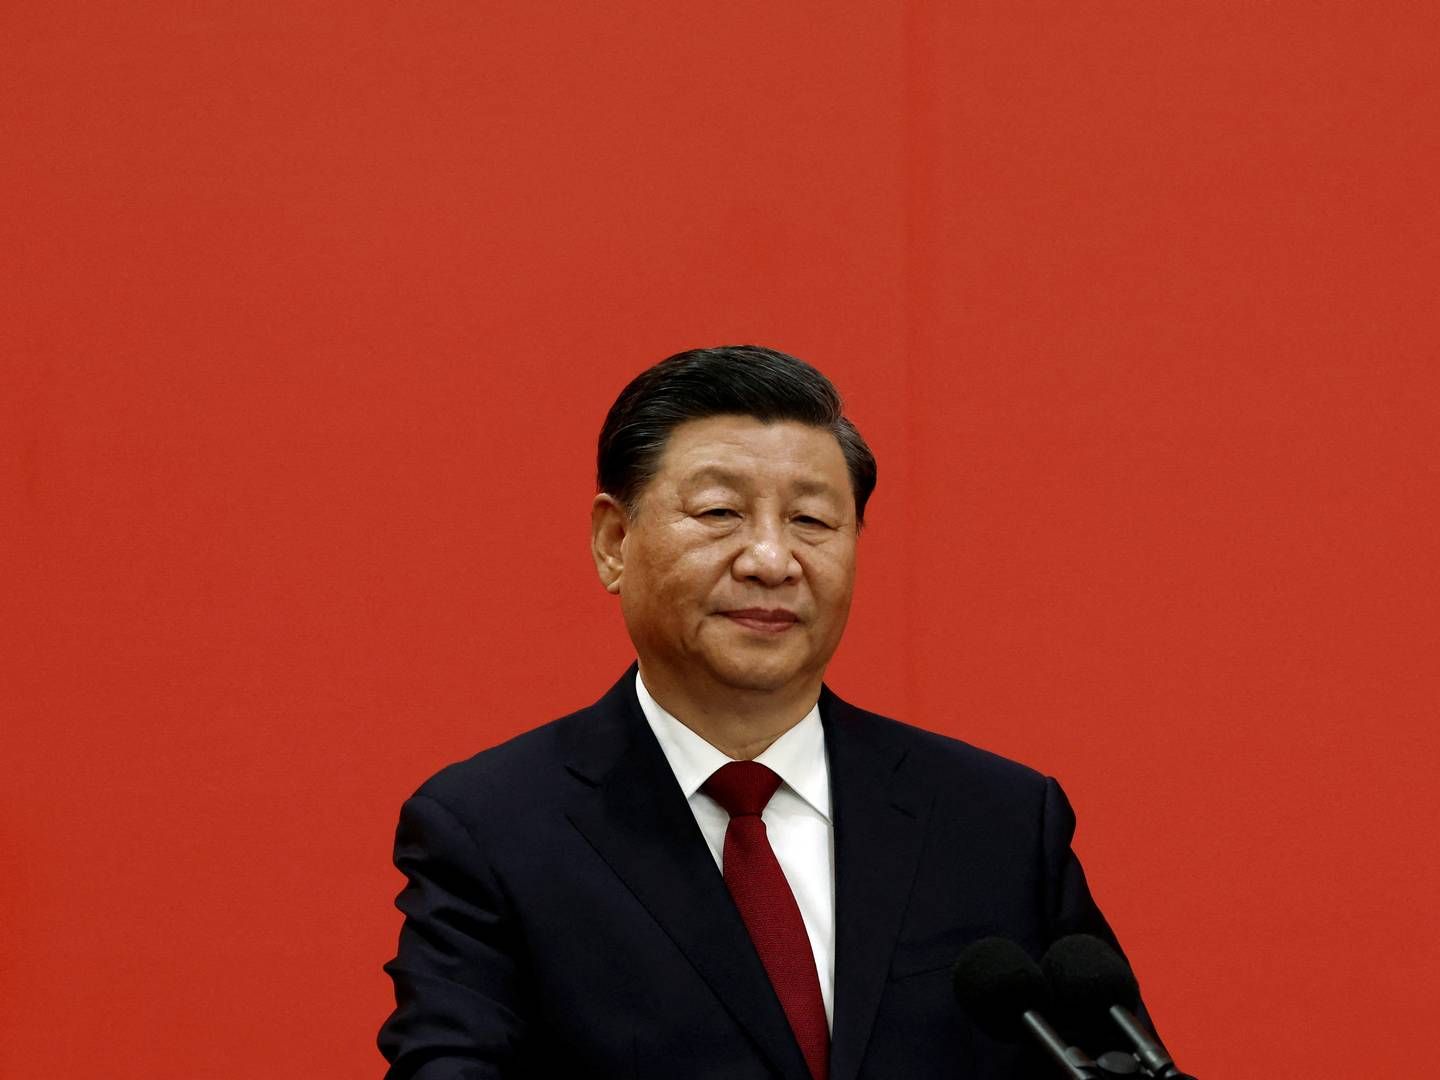 According to The Guardian, Chinese President Xi Jinping has asked the military to prepare for war, interpreted by the media as a Taiwan-targeted warning. | Photo: Tingshu Wang/Reuters/Ritzau Scanpix